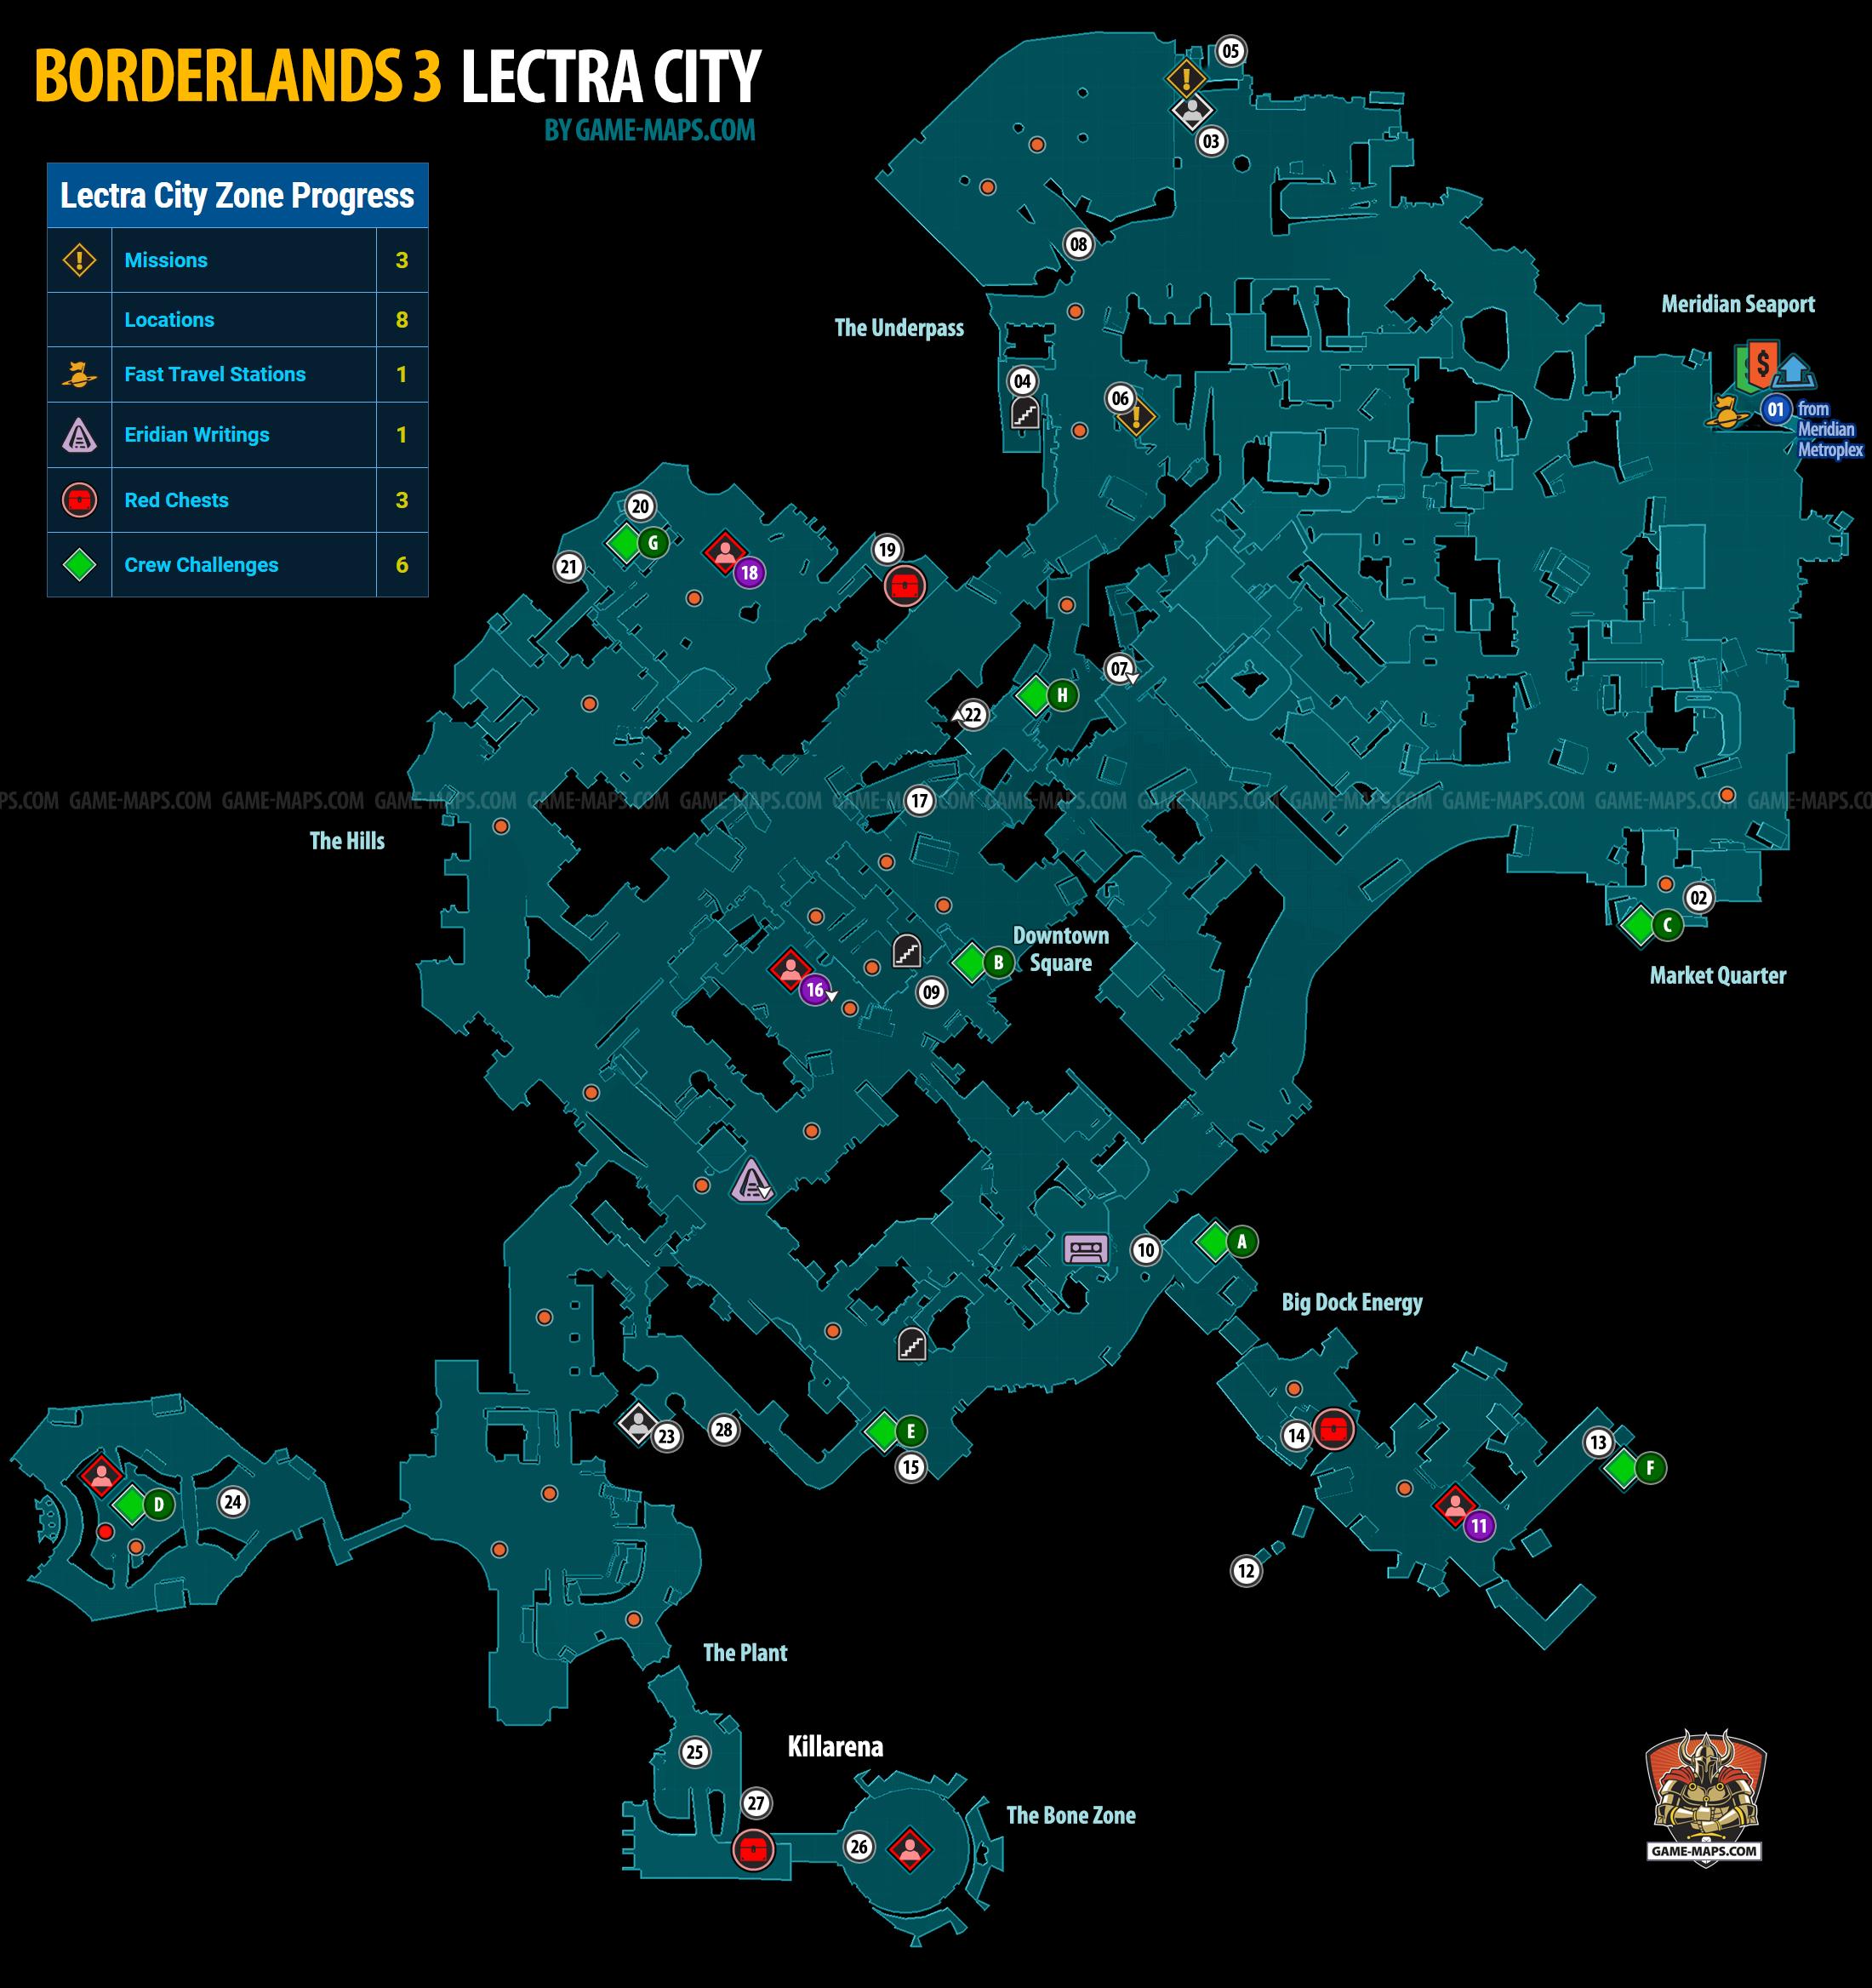 Lectra City Map on Promethea Planet for Borderlands 3